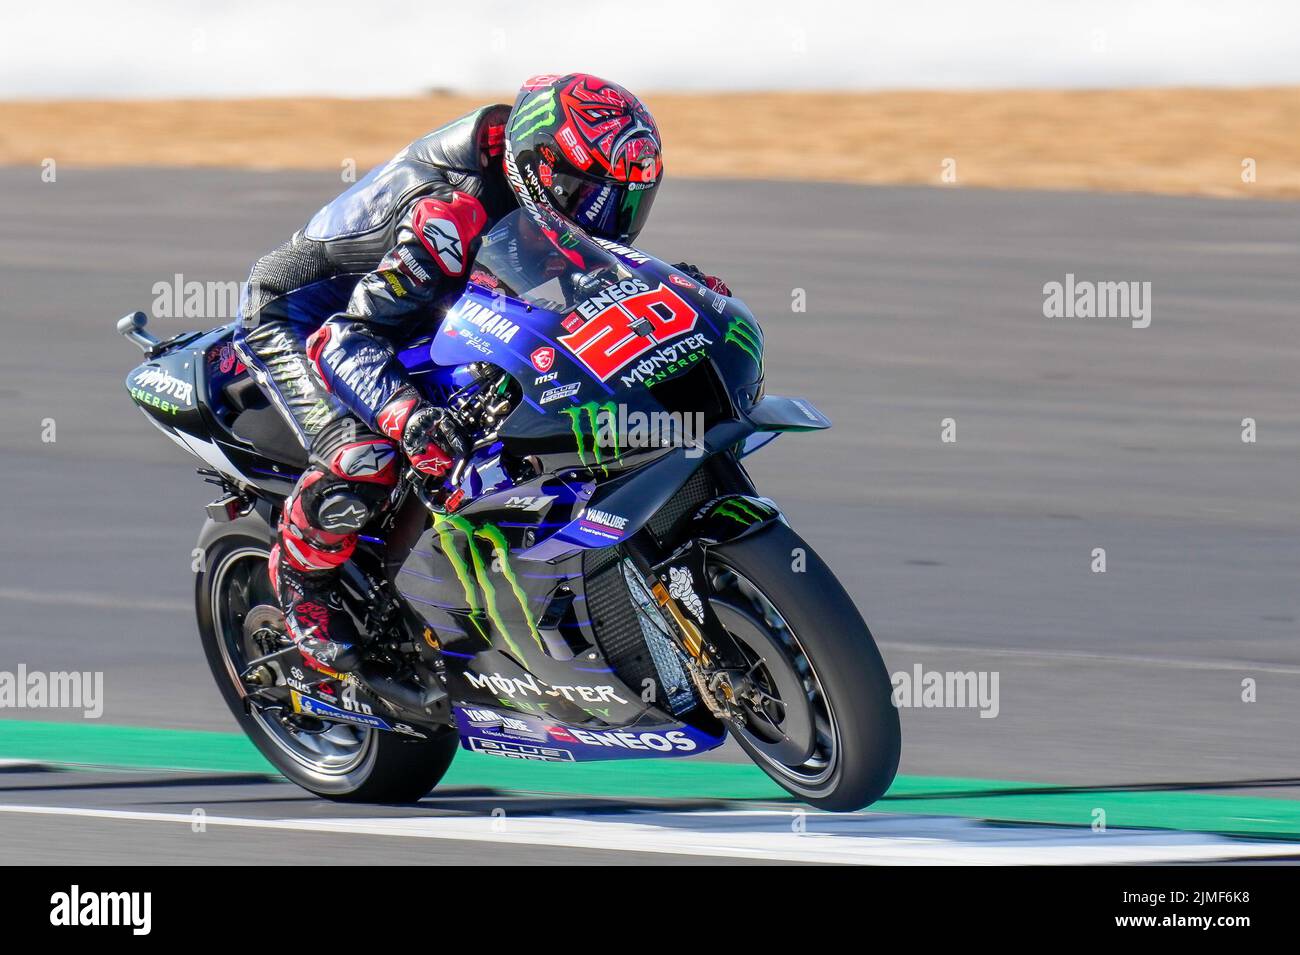 Towcester, UK. 06th Aug, 2022. Fabio QUARTARARO (France) of the Monster Energy Yamaha MotoGP Team during the 2022 Monster Energy Grand Prix MotoGP Free Practice 3 session at Silverstone Circuit, Towcester, England on the 6th August 2022. Photo by David Horn. Credit: PRiME Media Images/Alamy Live News Stock Photo